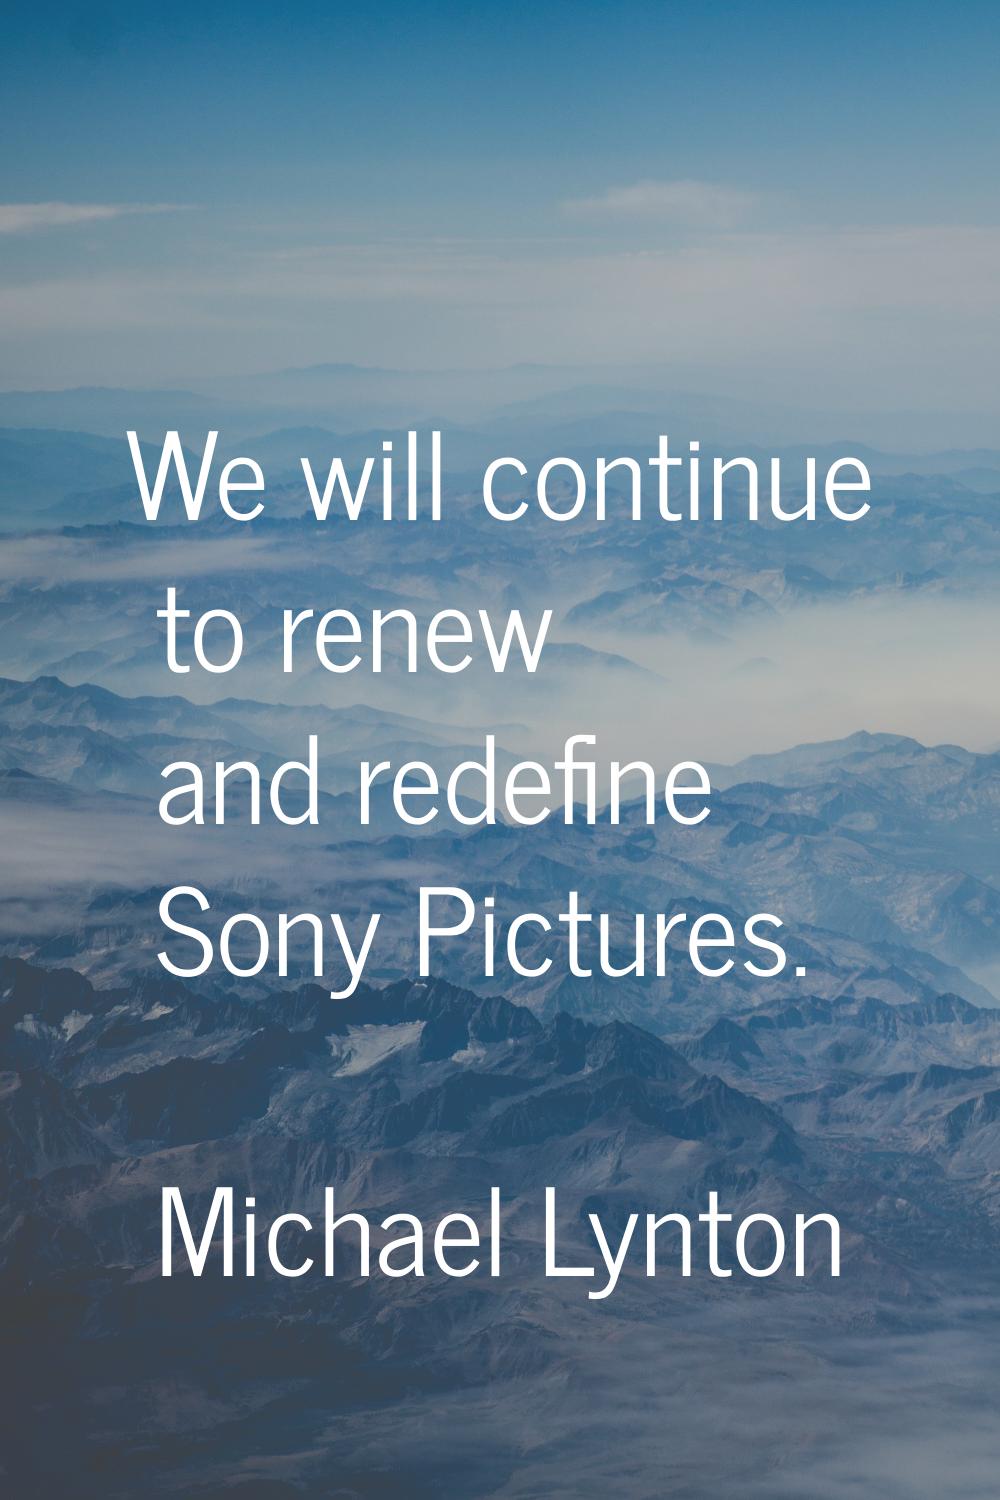 We will continue to renew and redefine Sony Pictures.